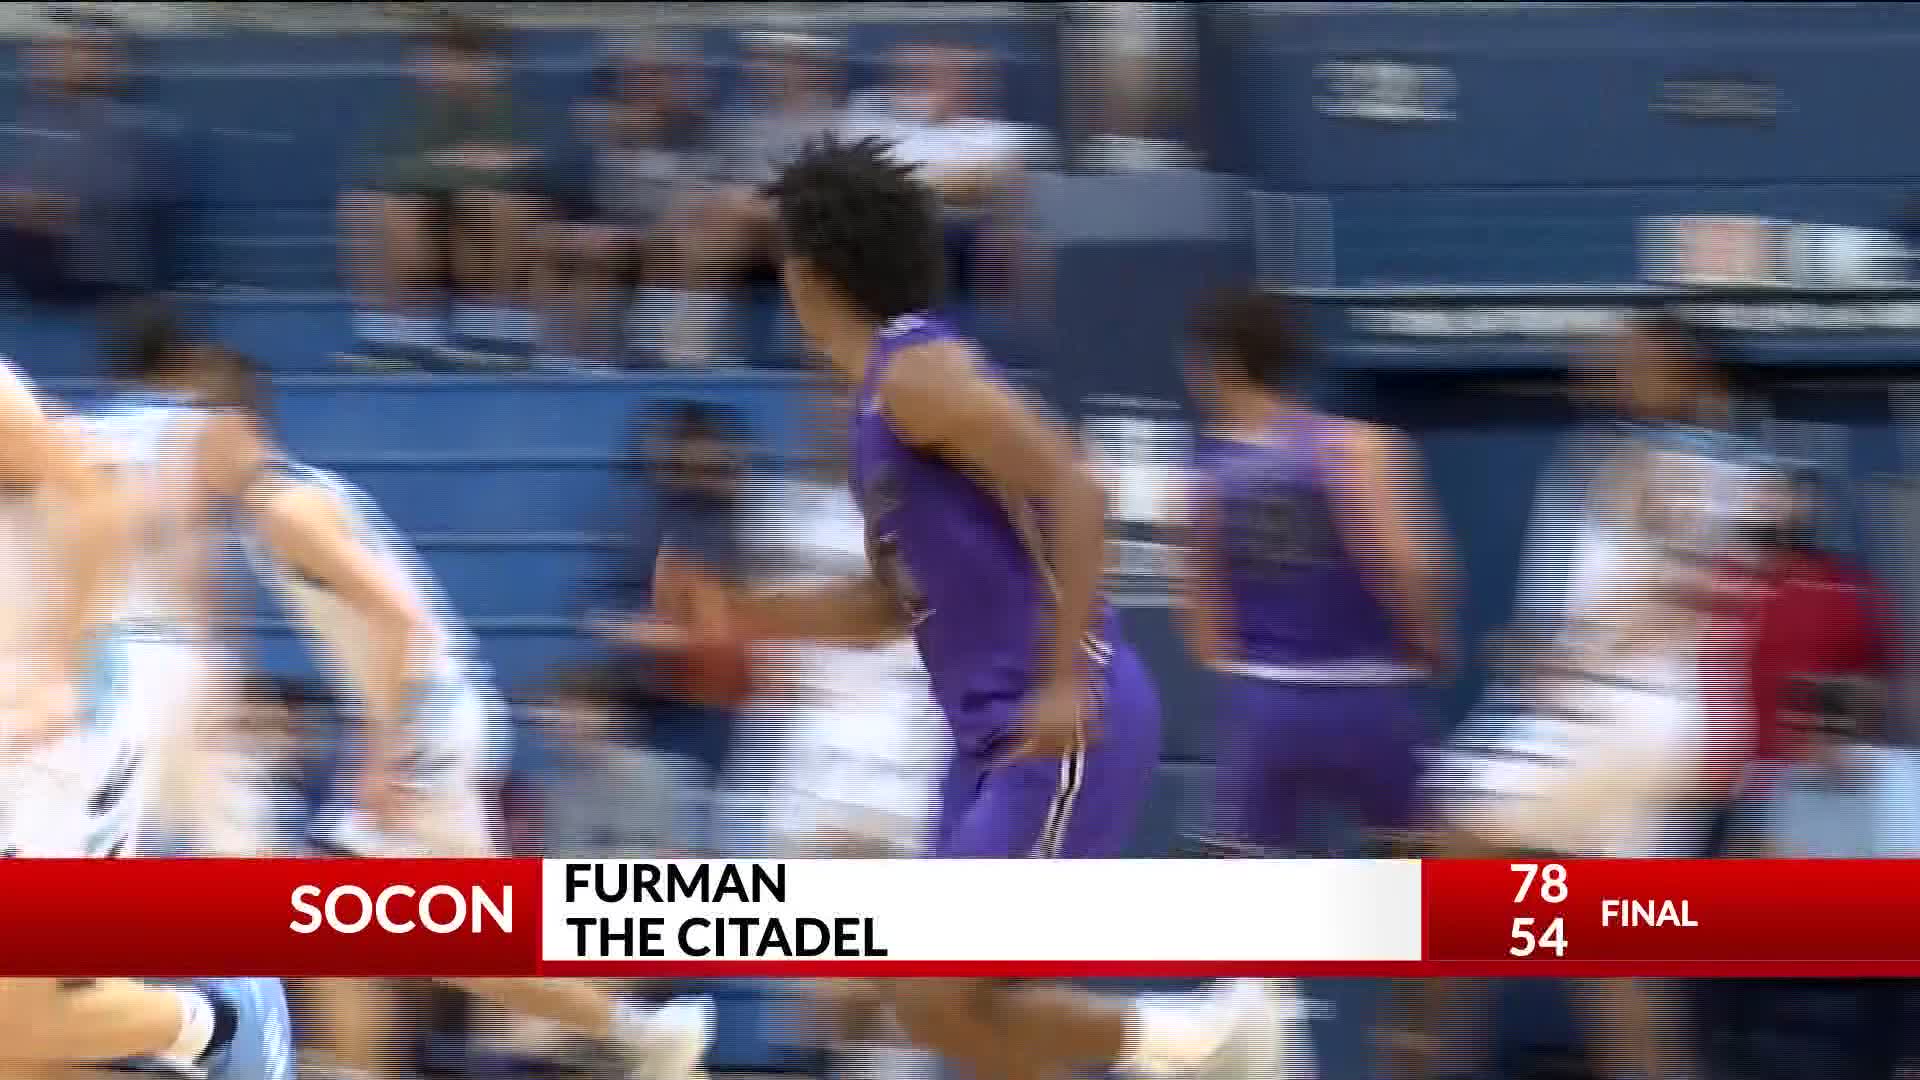 Thumbnail for the video titled "Mounce Scores 22 Points as Furman Rolls Past The Citadel, 78-54"